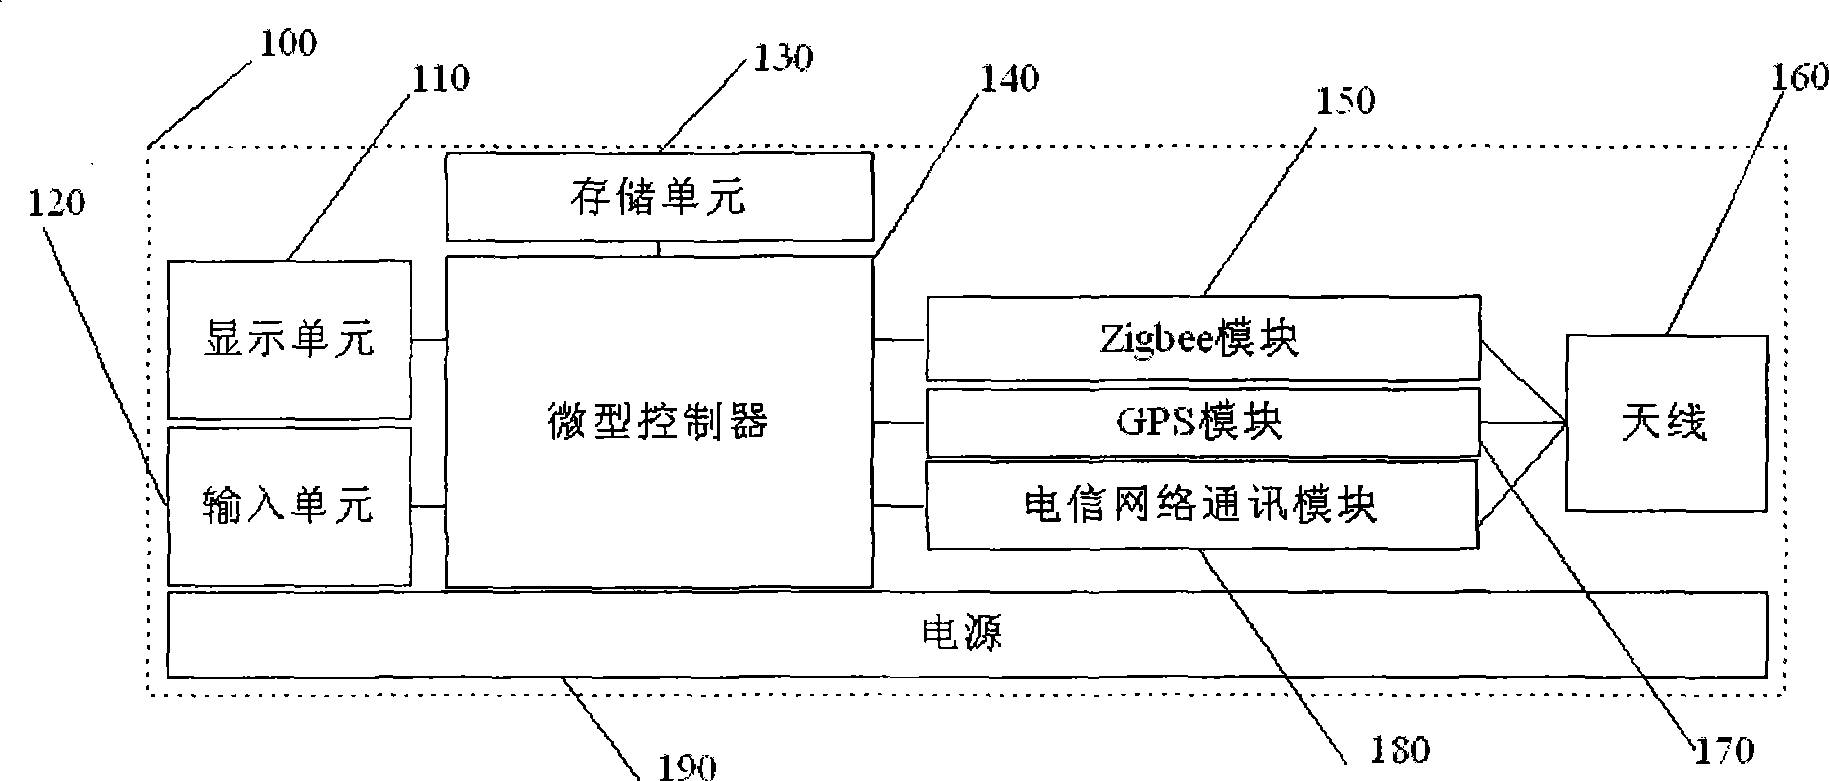 Movable positioning system and method